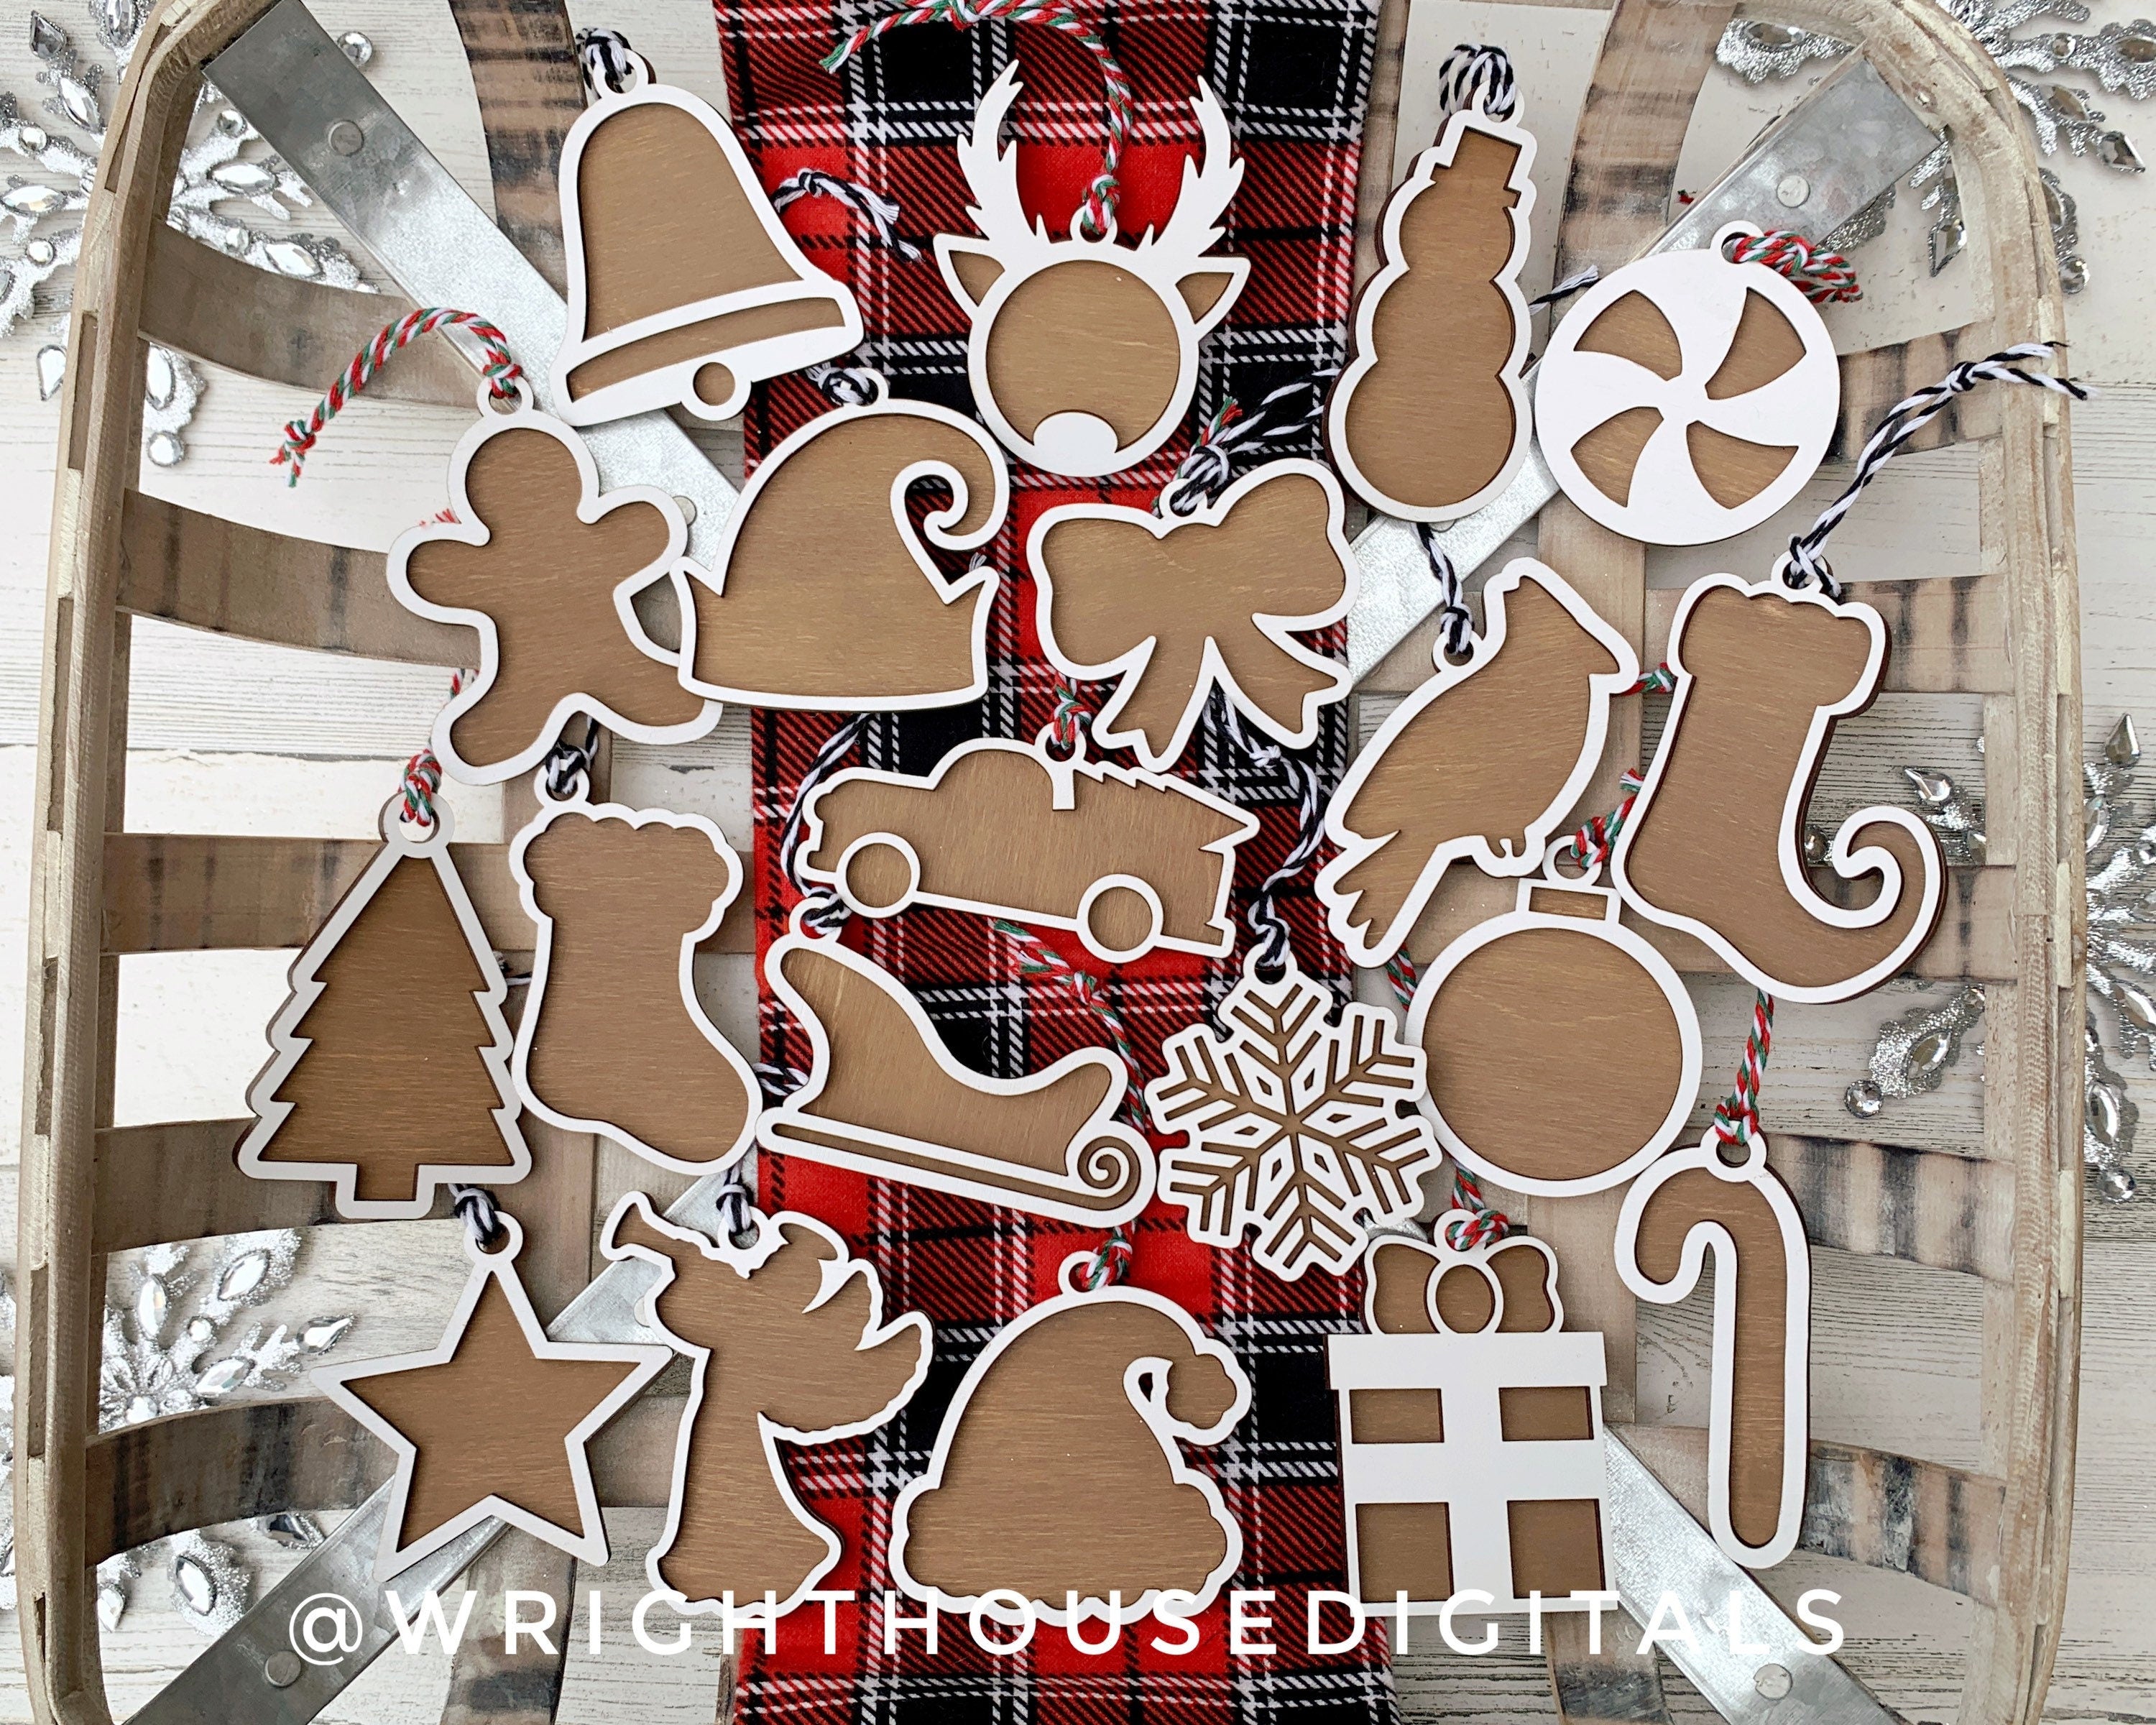 DIGITAL FILE - Christmas Cookie Ornaments - Layered - Rustic Farmhouse Style - SVG Cut File For Glowforge - Cut Files For Lasers